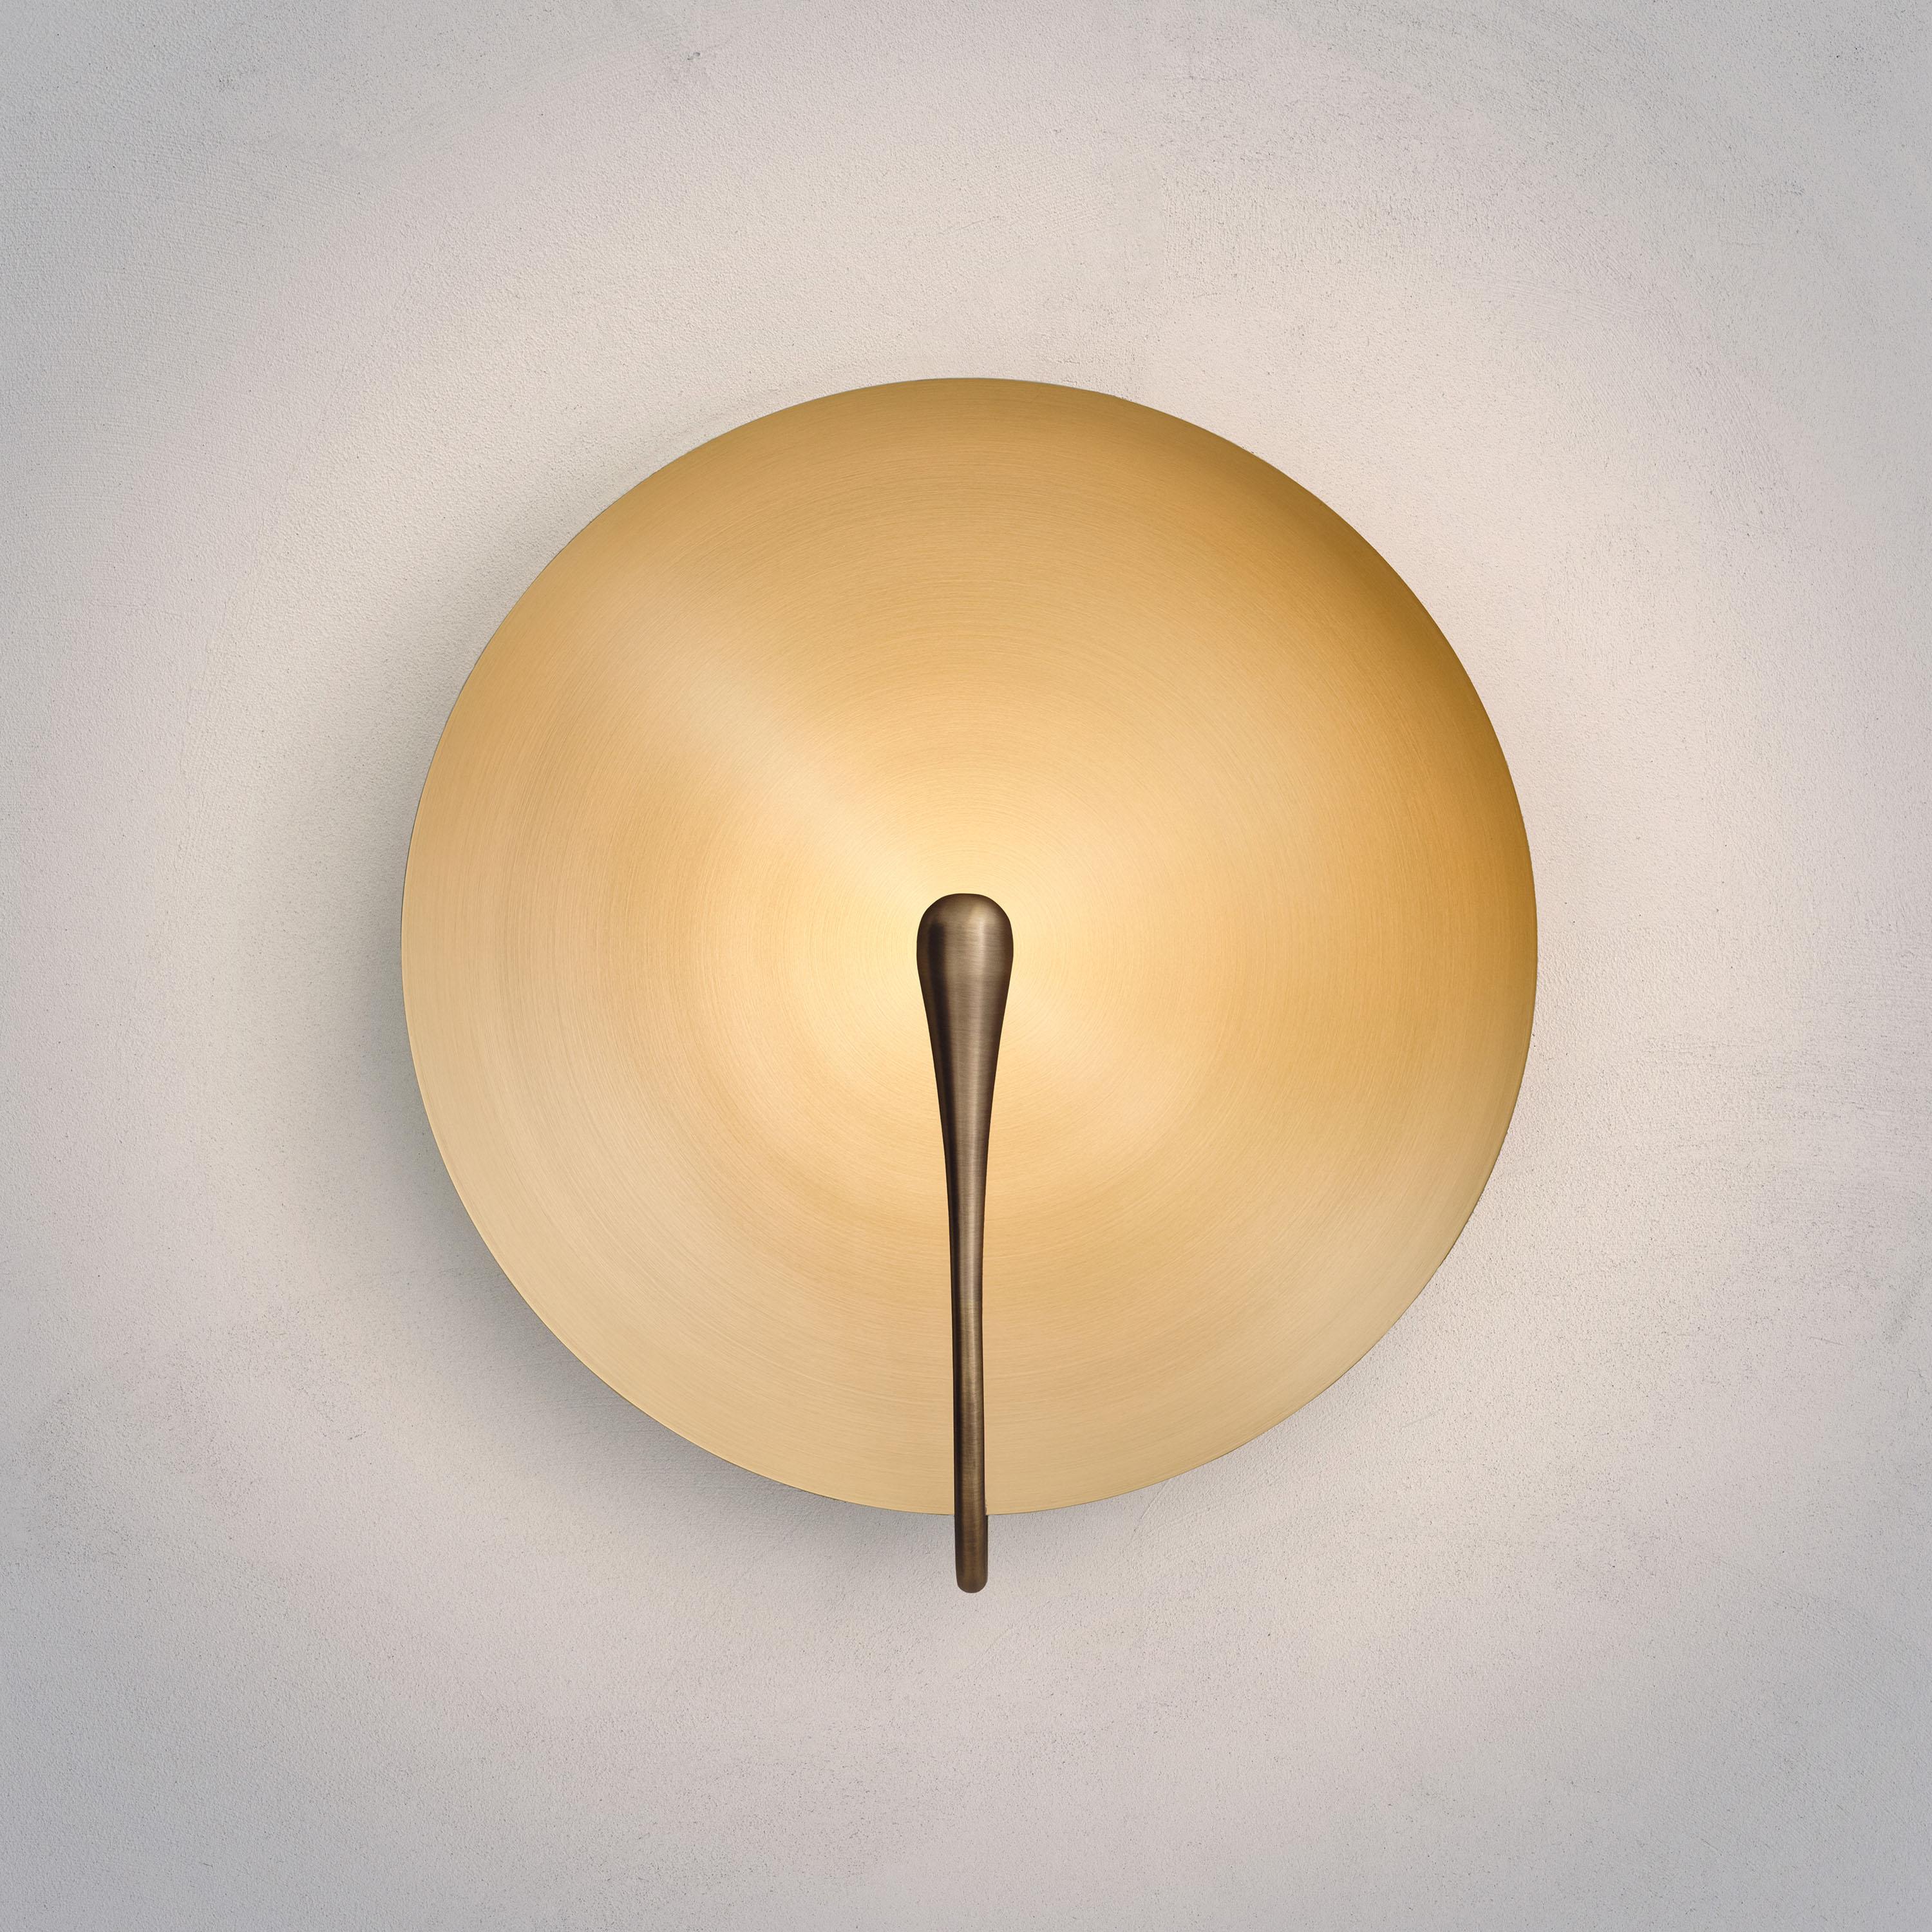 A gentle silhouette of a plate makes up this unique wall light. To create this metalic finish, a brushed finish is applied on a hand-spun brass plate.
 
Softly illuminated with integrated LED from within, this sculptural wall piece sits elegantly in